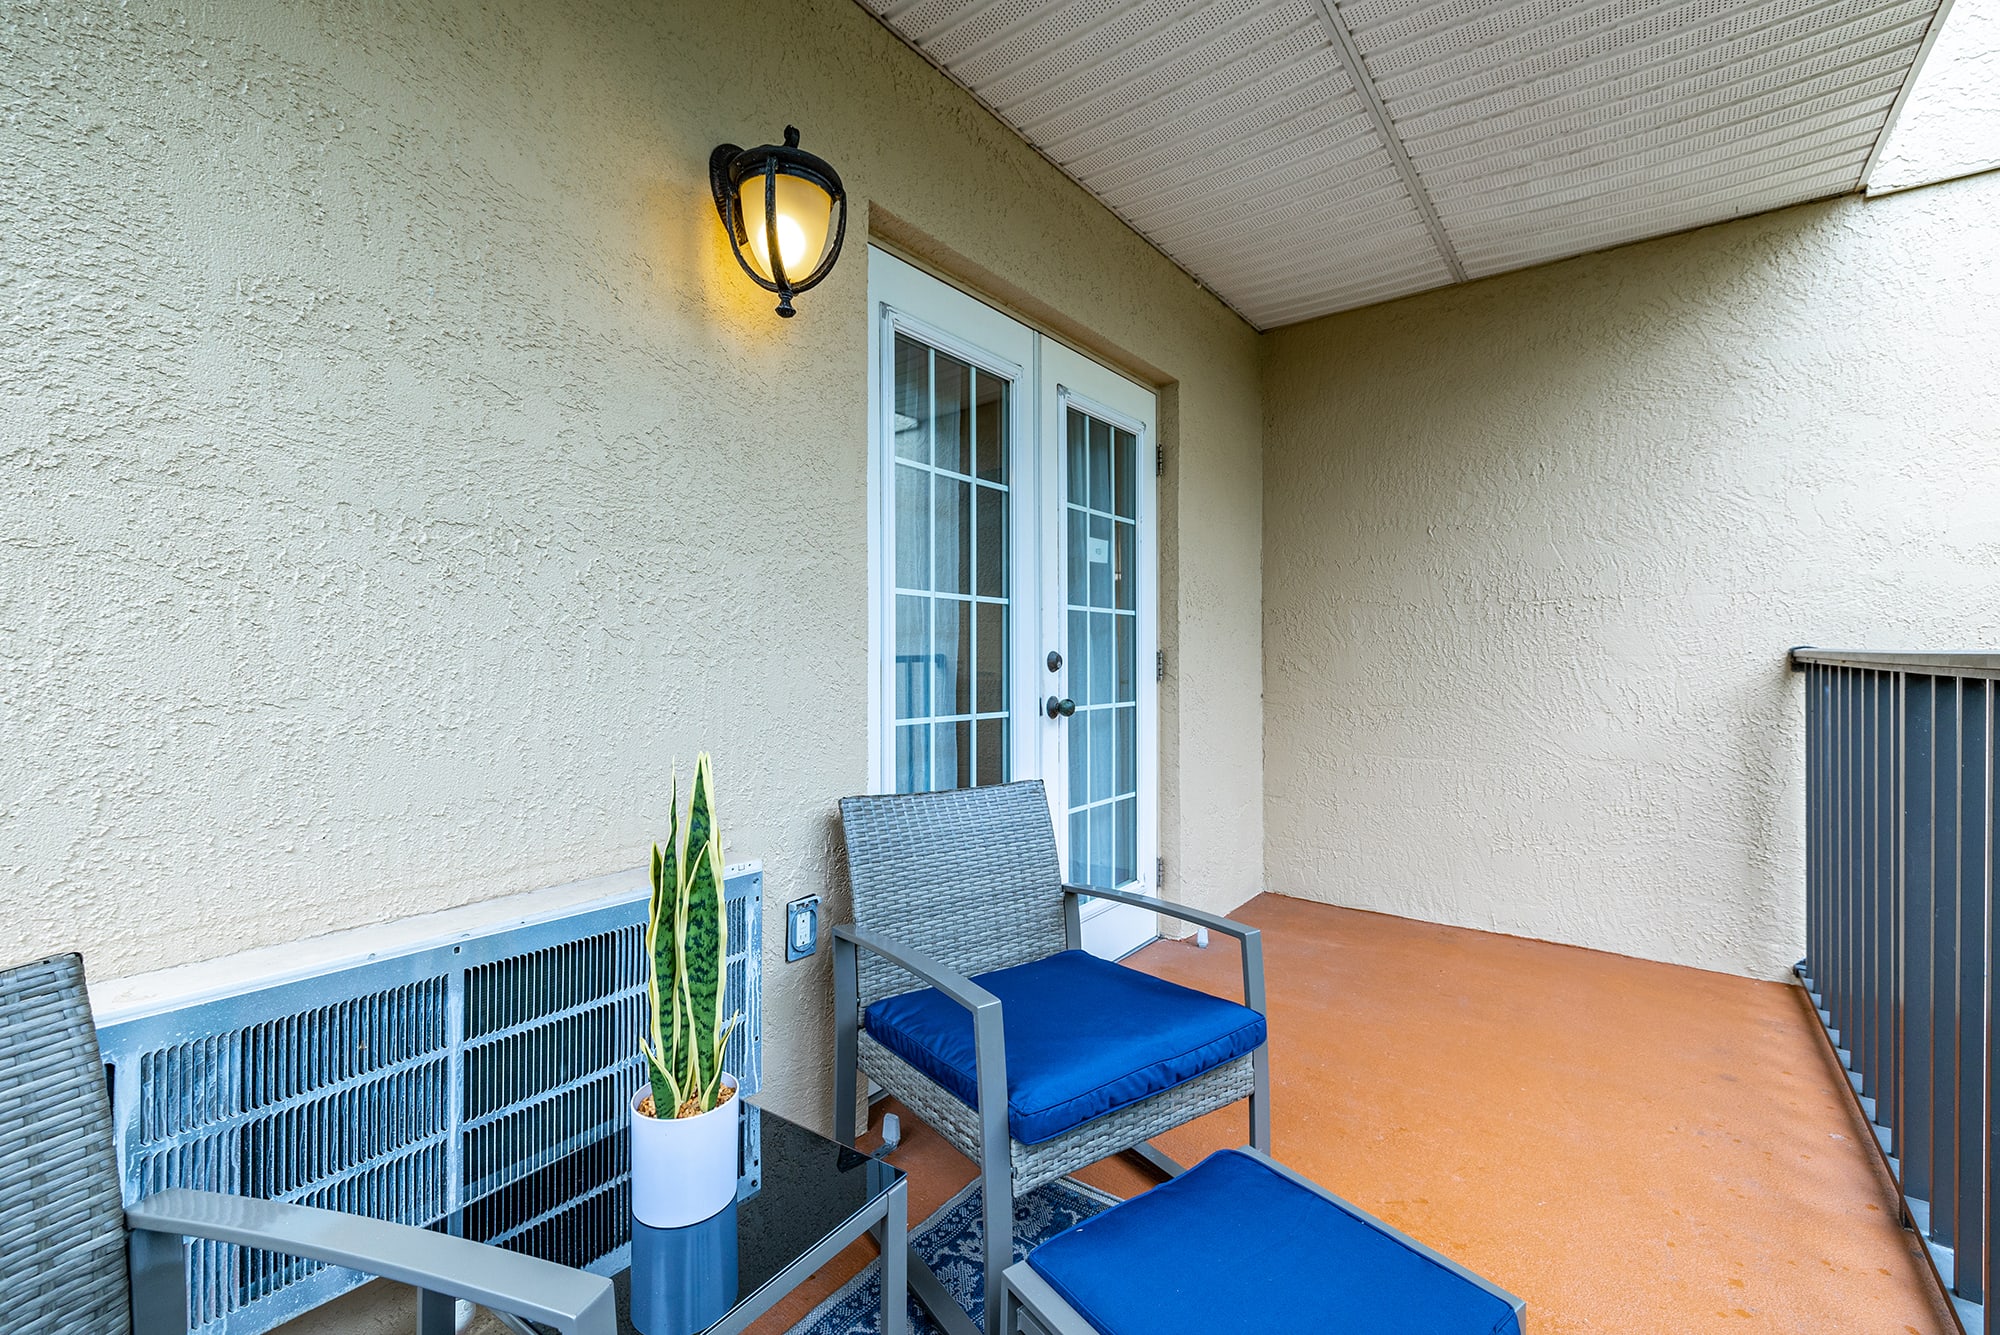 Enjoy some peace and quiet on the private porch